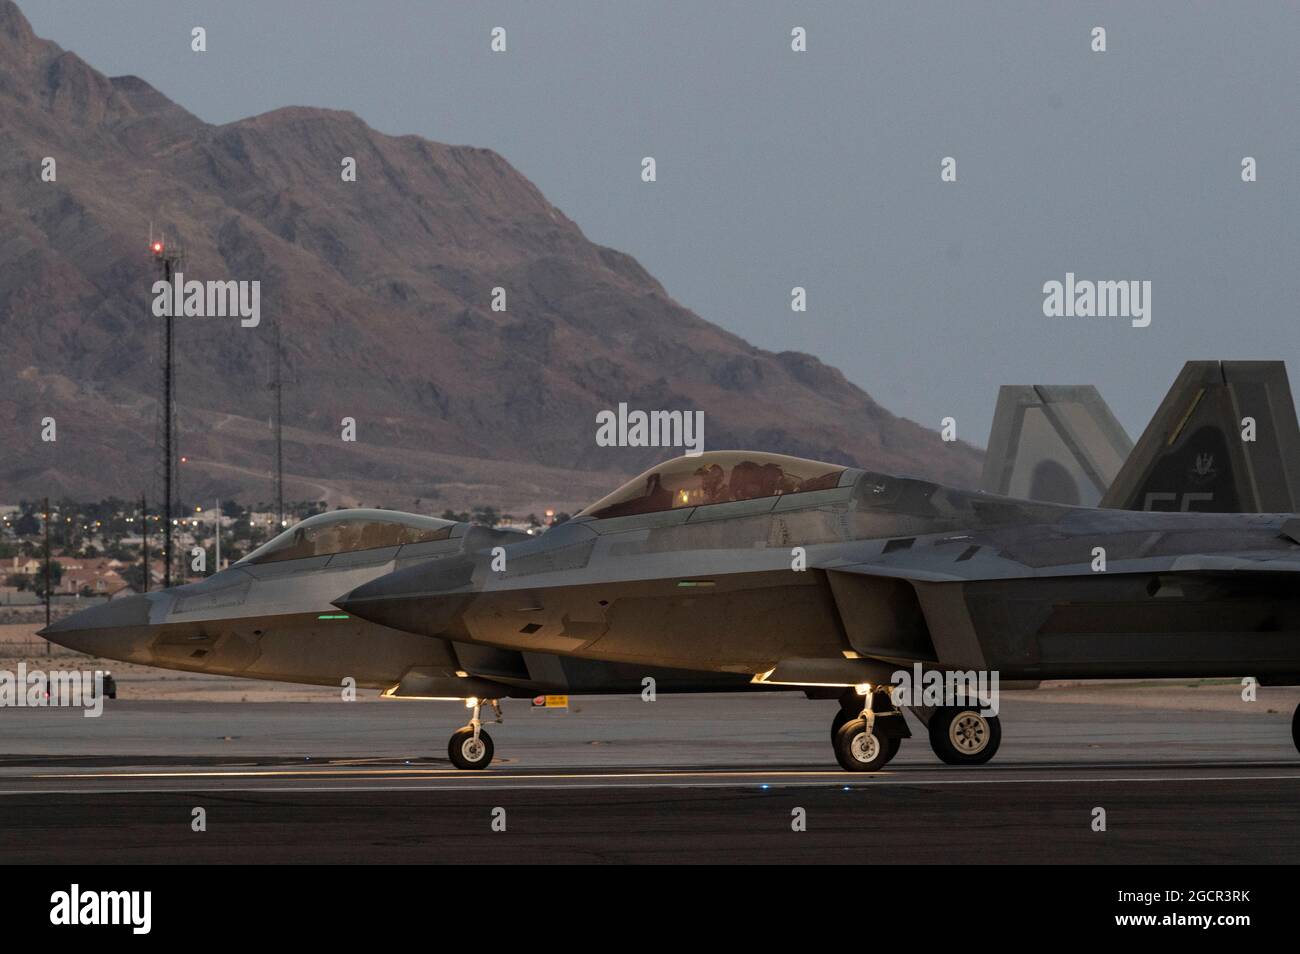 Two F-22 Raptors assigned to the 1st Fighter Wing, Langley Air Force Base, Virginia, line up prior to take-off for a night-training mission during Red Flag-Nellis 21-3 at Nellis Air Force Base, Nevada, Aug. 4, 2021. The 1st FW hosted RF-Nellis 21-3 as the lead wing with nearly 100 aircraft, such as the F-35, F-35, F-22, F-16CJ, F-16C, EC-130H, EA-18G, B-52, B-2, F/A-18 C/D, MQ-9, E-3, E-8, RC-135, RQ-4B30, RQ-4B40, U-2, HH-60, HC-130, KC-135 and KC-46, that participated in complex-mission scenarios against aggressor forces. (U.S. Air Force photo by Tech. Sgt. Alexandre Montes) Stock Photo